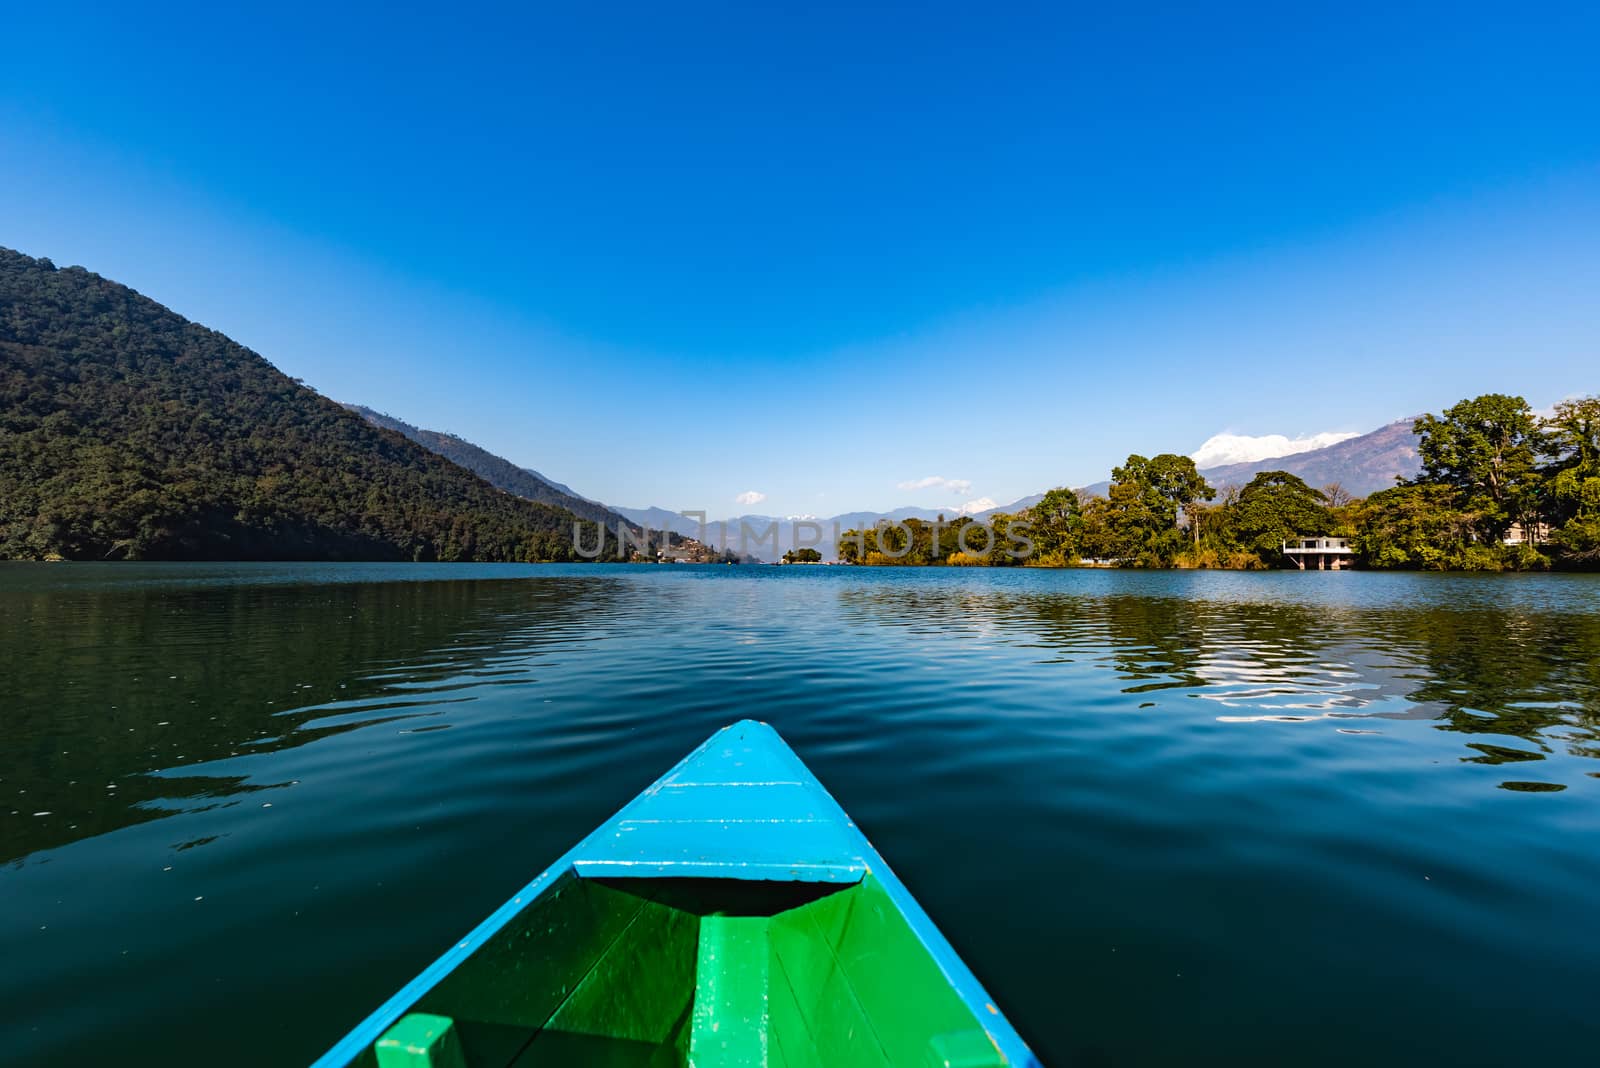 Canoe in the lake of Pokhara on Nepal by rayints